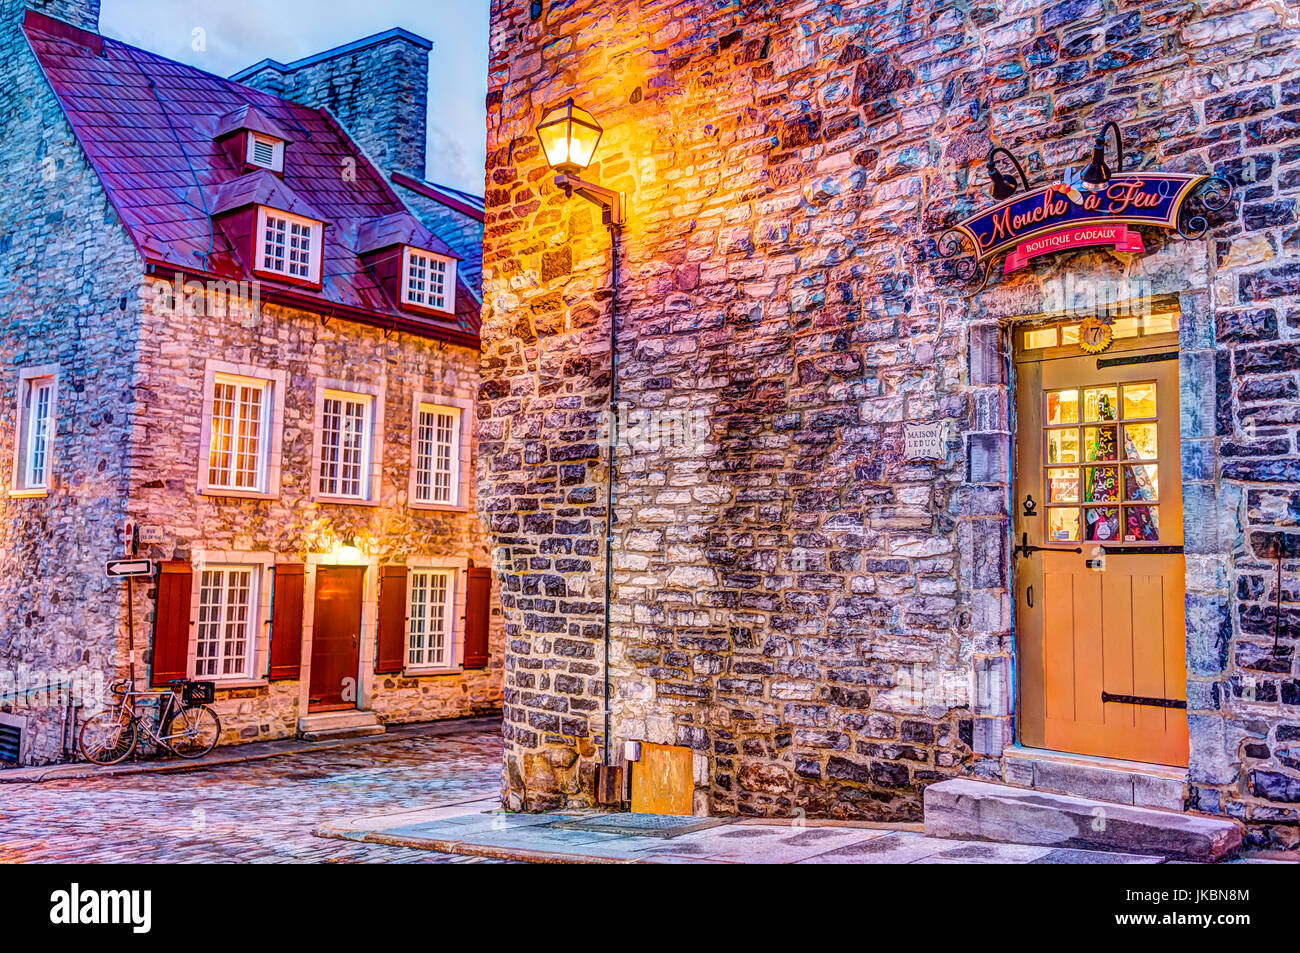 Quebec City, Canada - May 31, 2017: Colorful stone buildings on street during twilight in lower old town with Mouche a Feu boutique Stock Photo